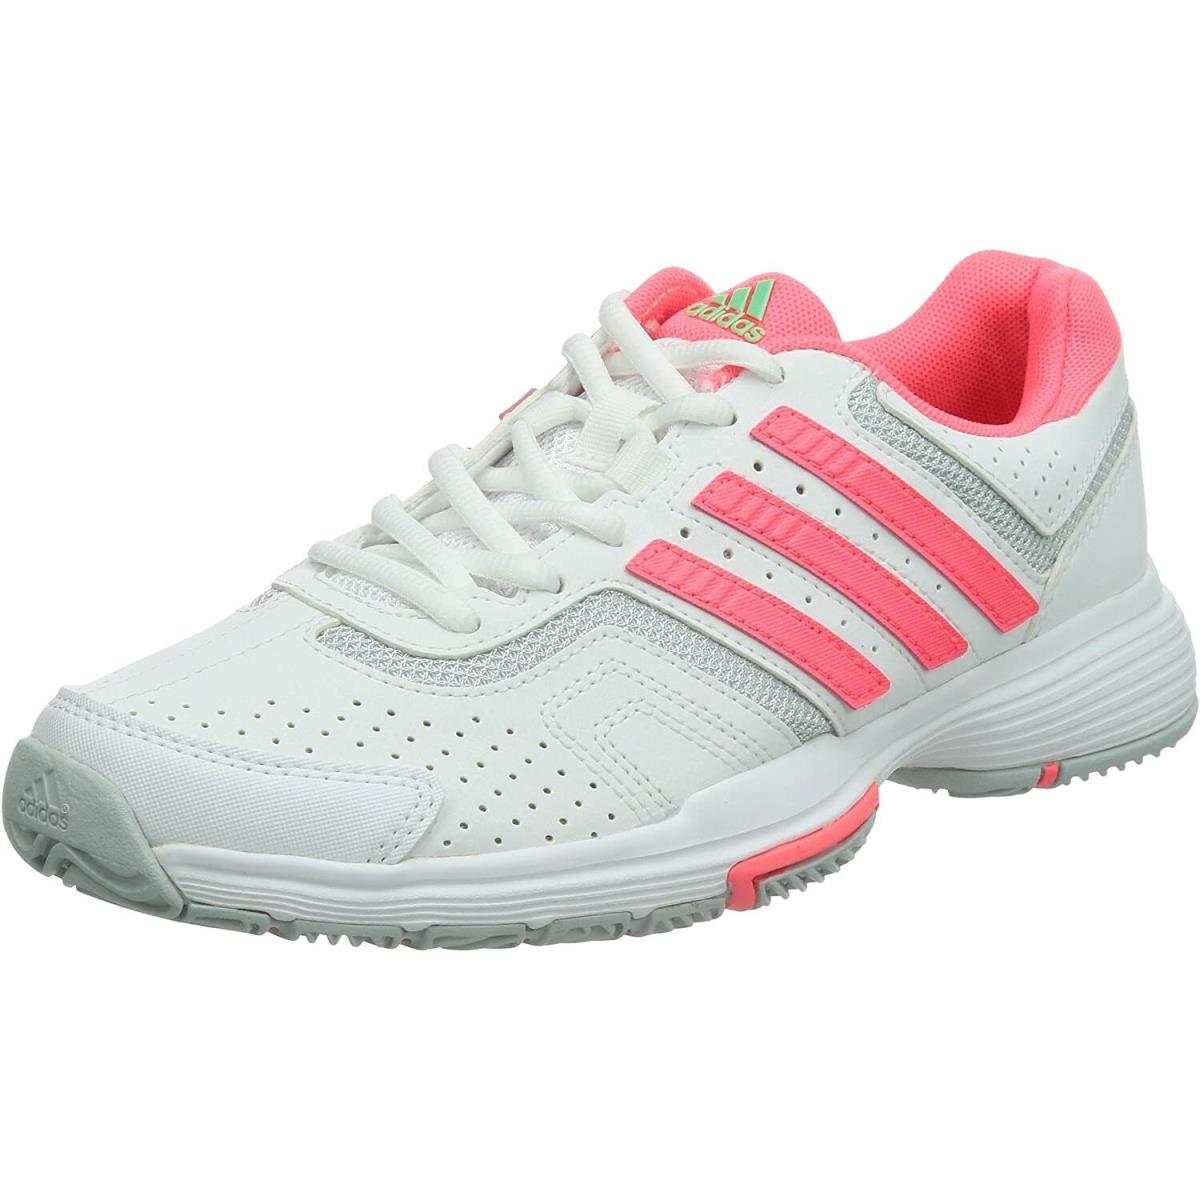 Adidas Women`s Athletic Tennis Sport Shoes Sneakers White Pink Silver US Sz 11.5